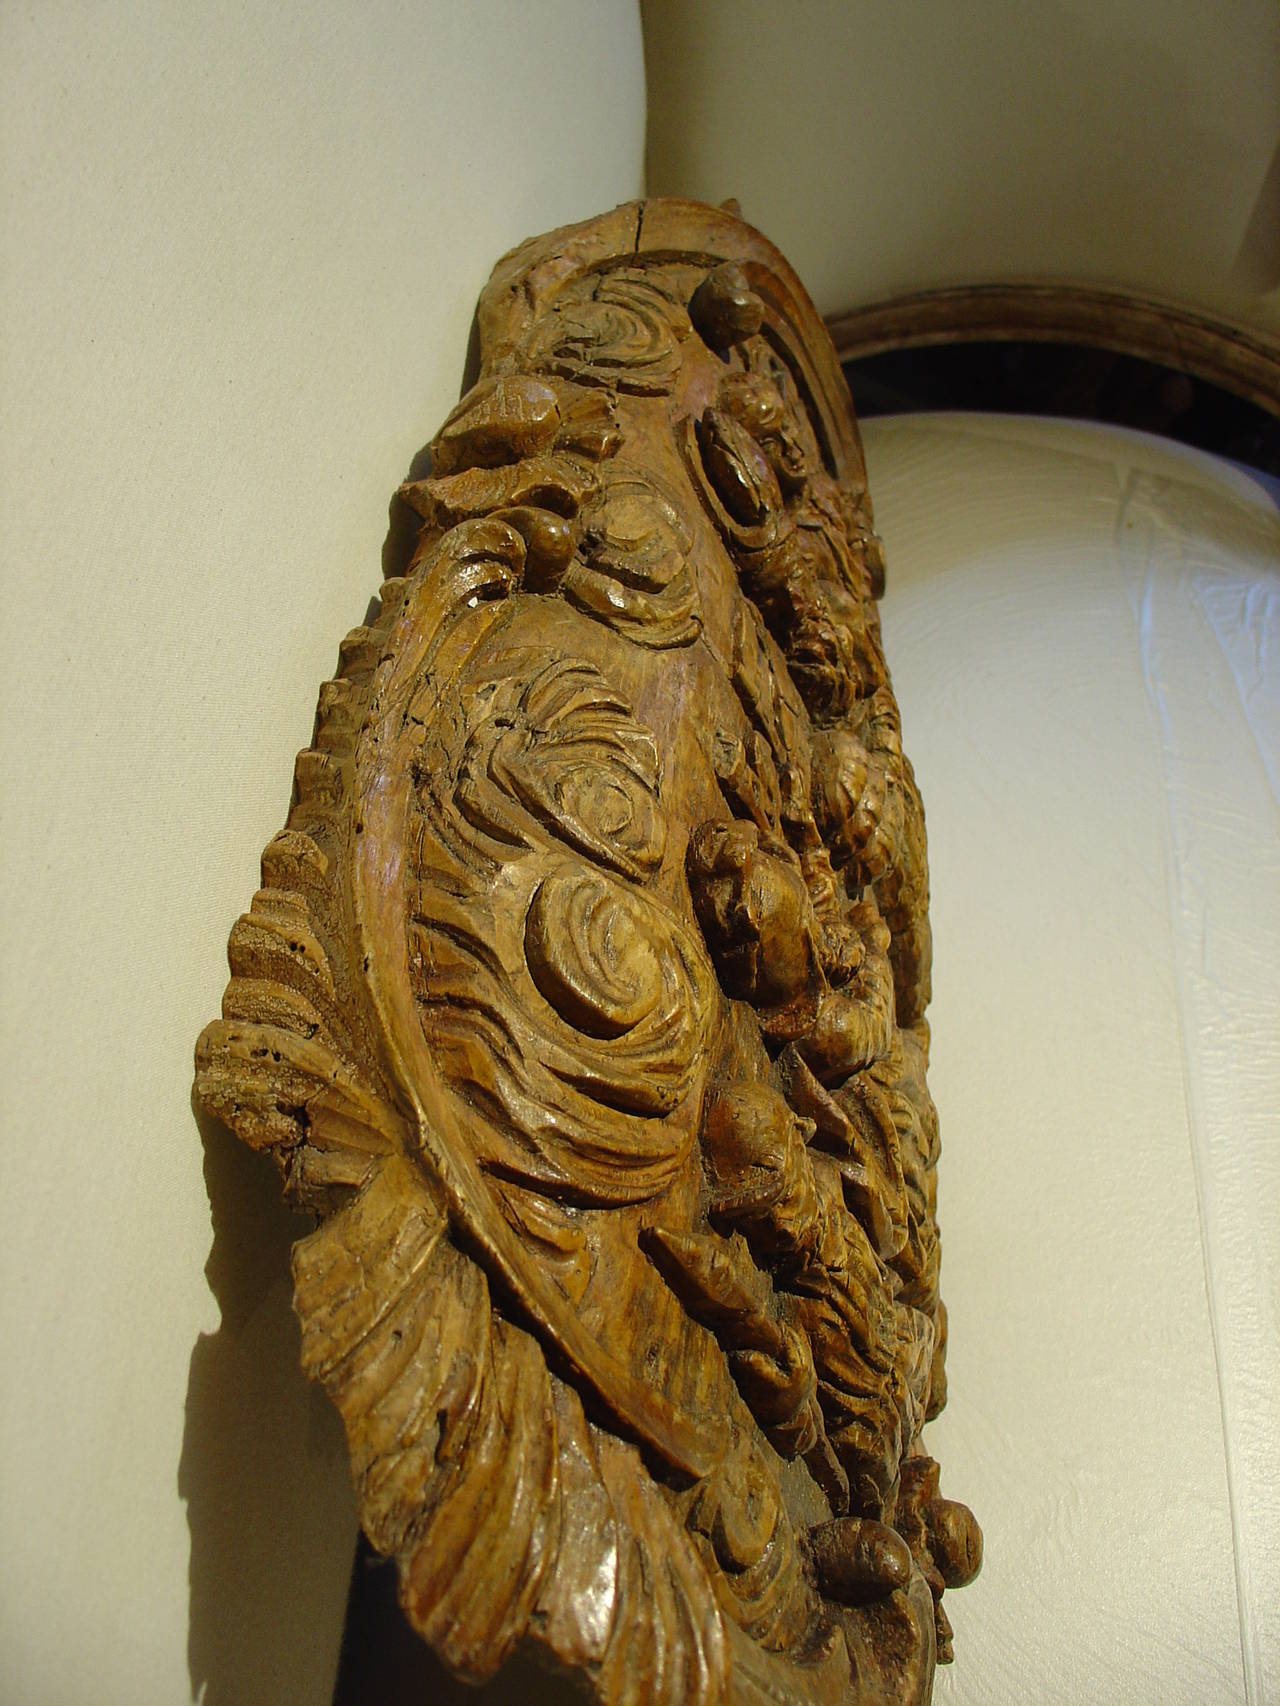 Carved Unusual 17th Century Wood Carving Sculpture from Northern France